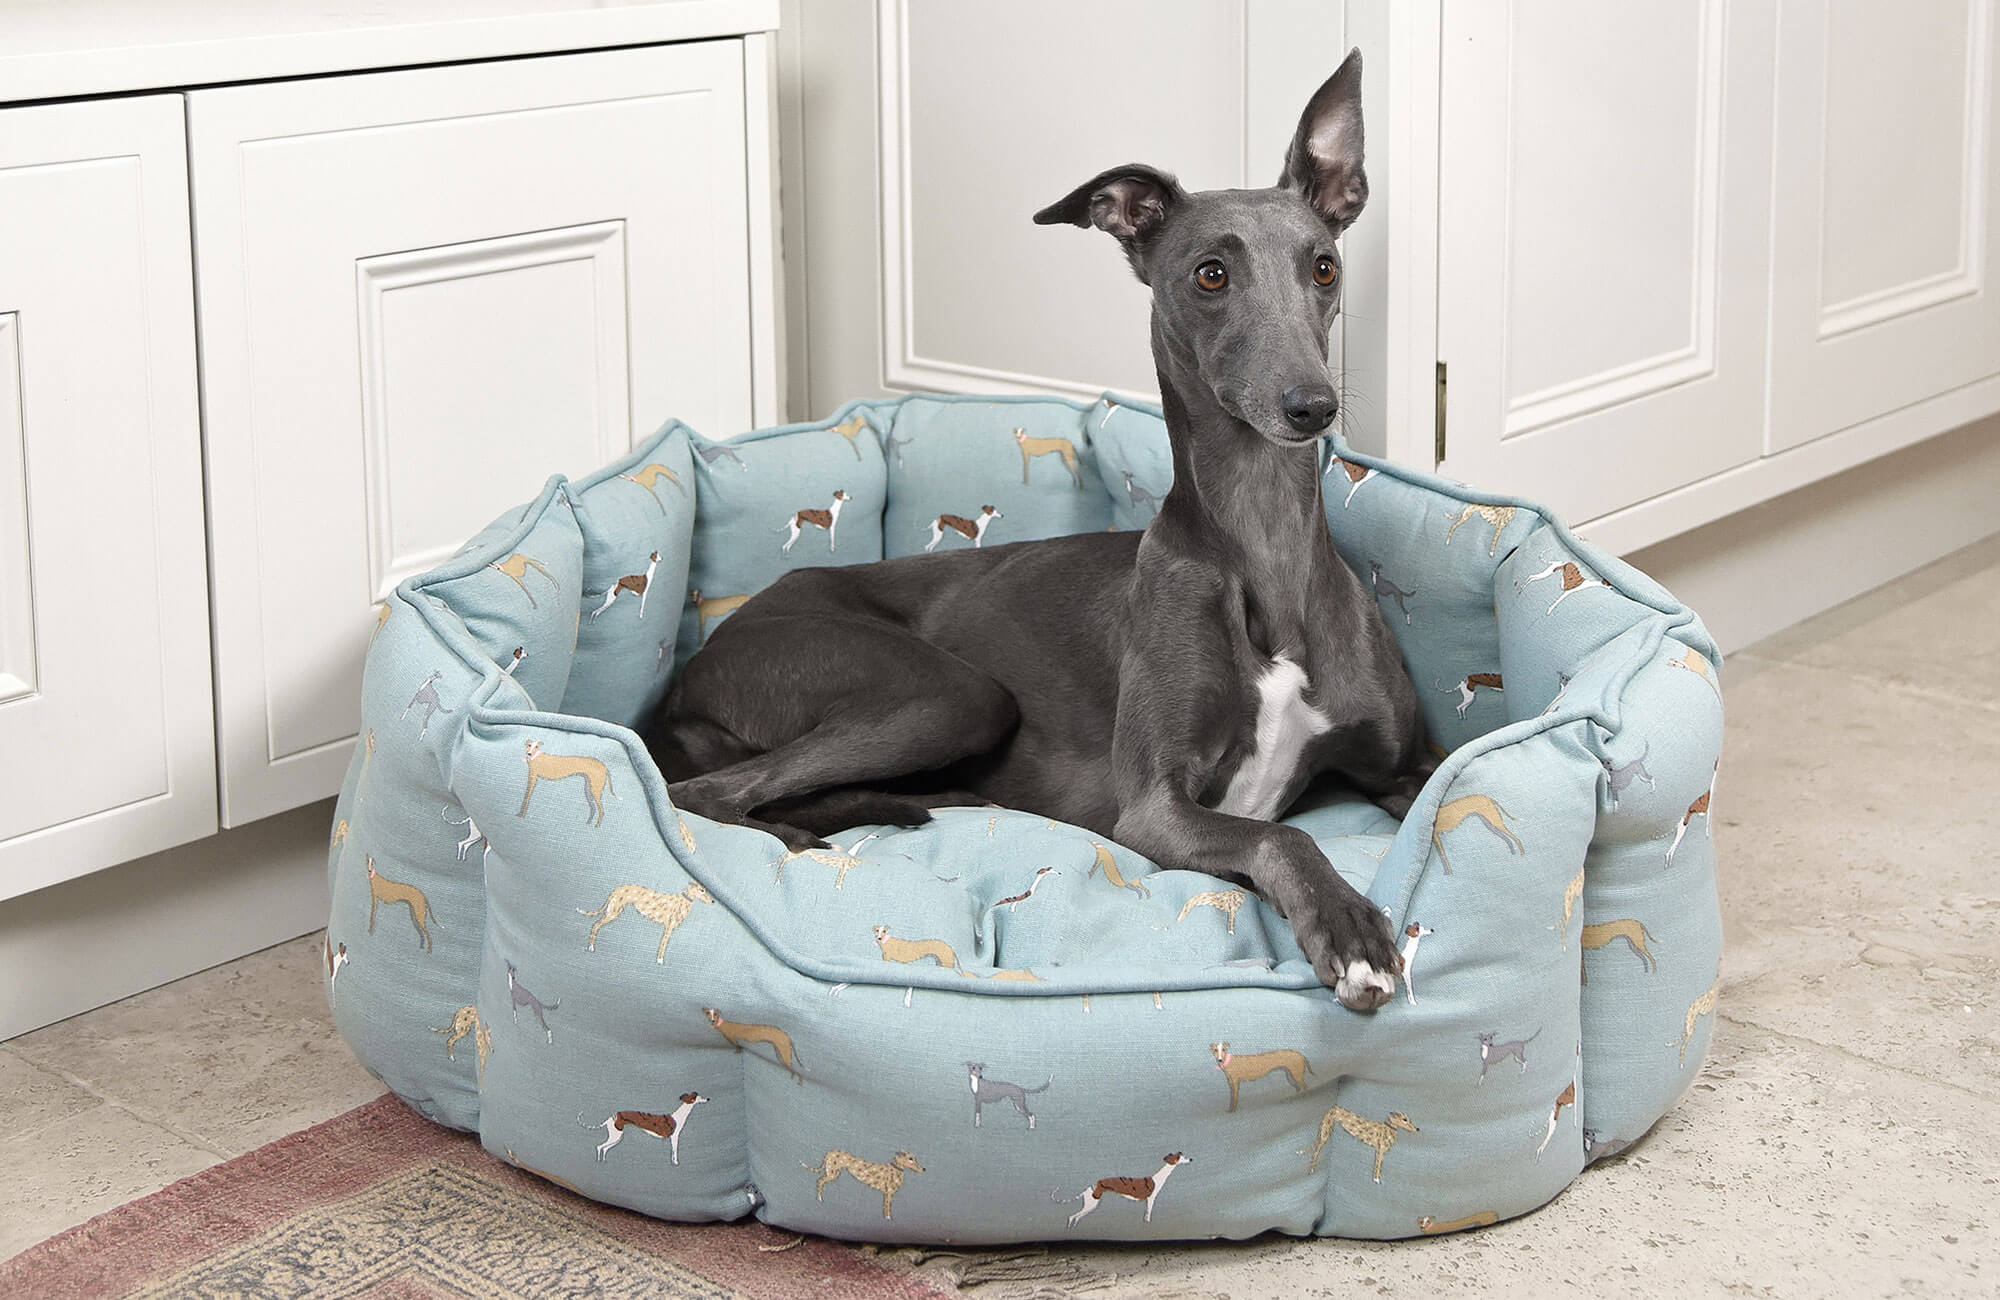 About lurchers, whippers and greyhounds